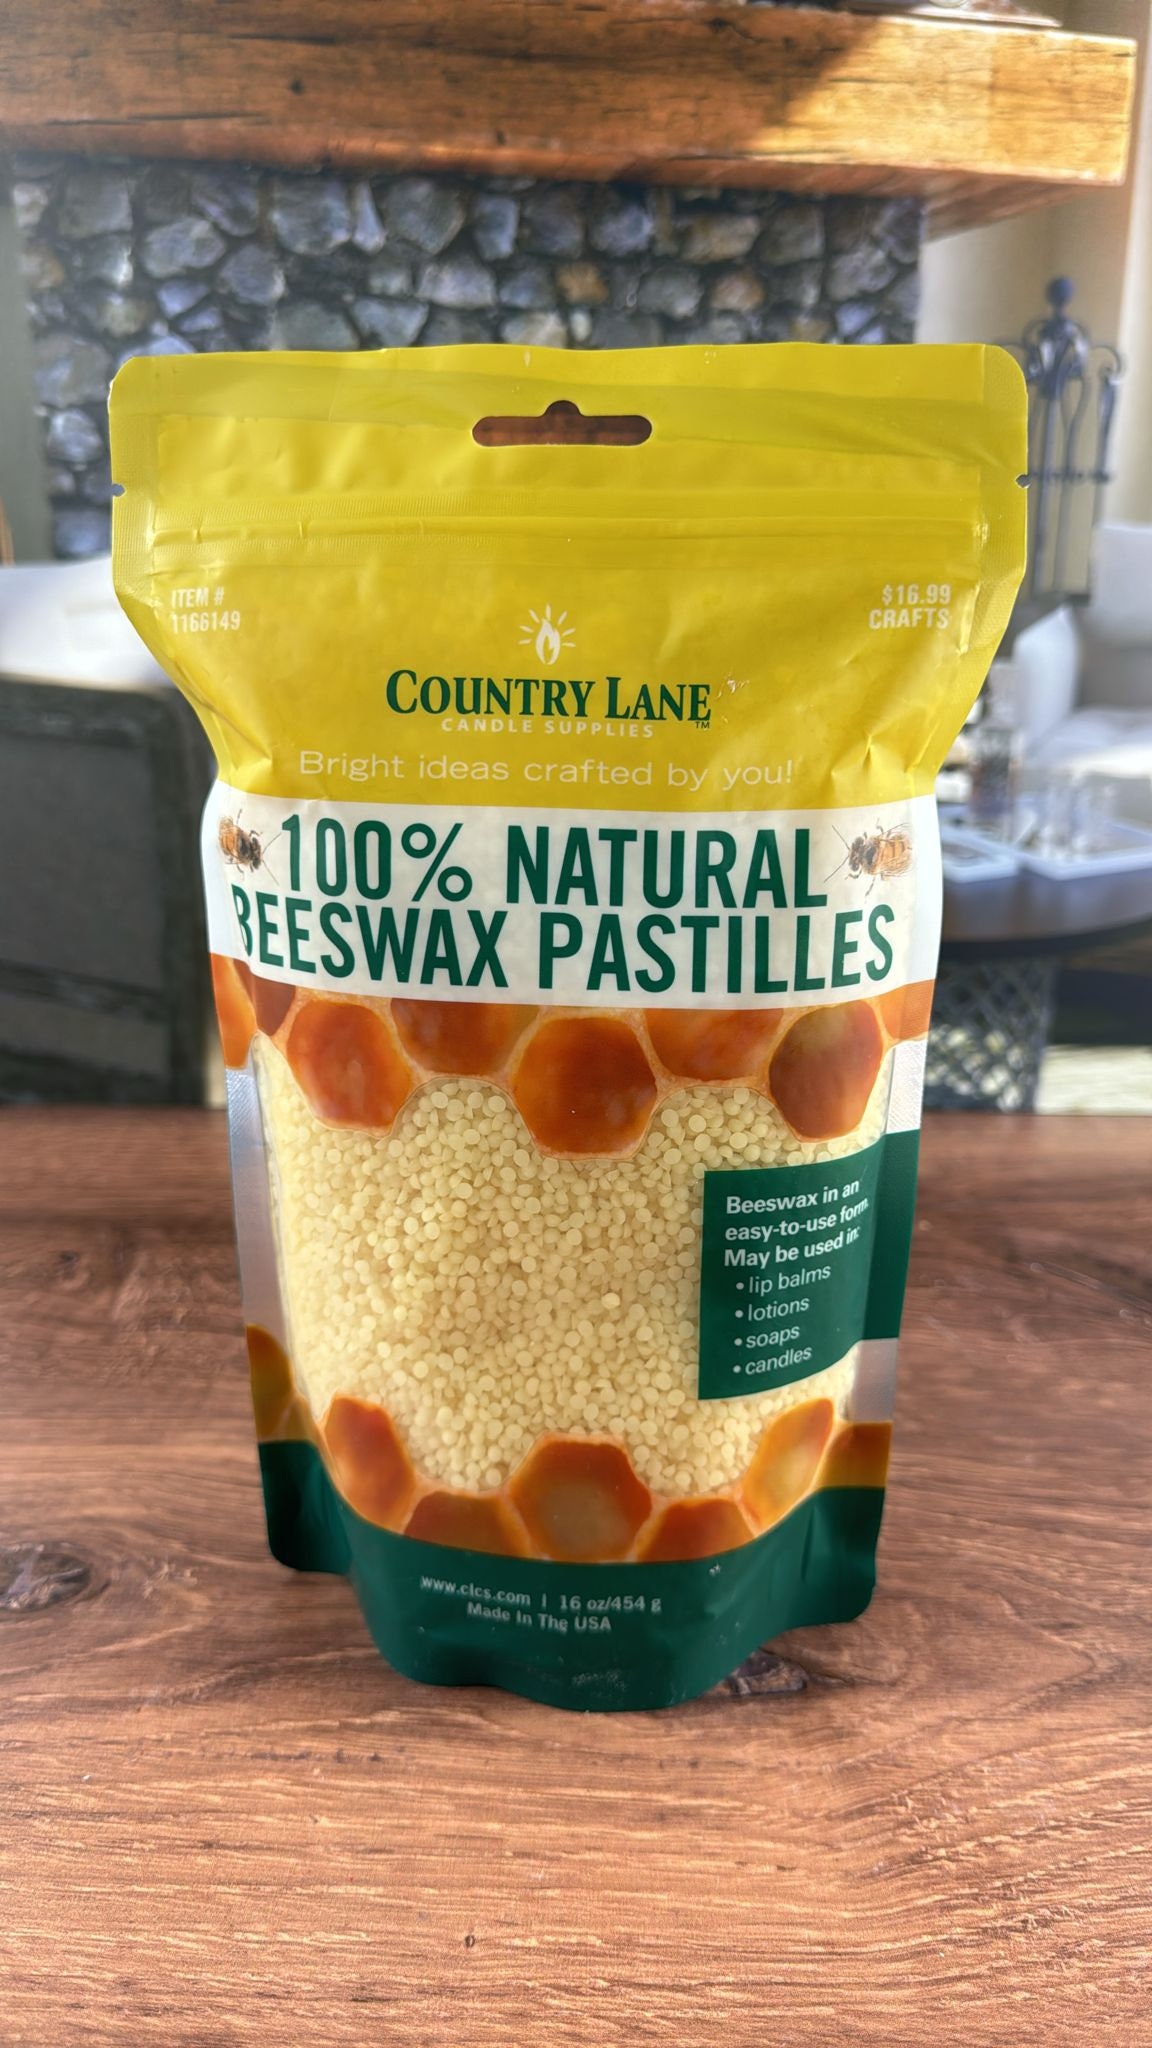 Yellow Beeswax Pellets  Premium Pastilles for DIY Candles, Balms